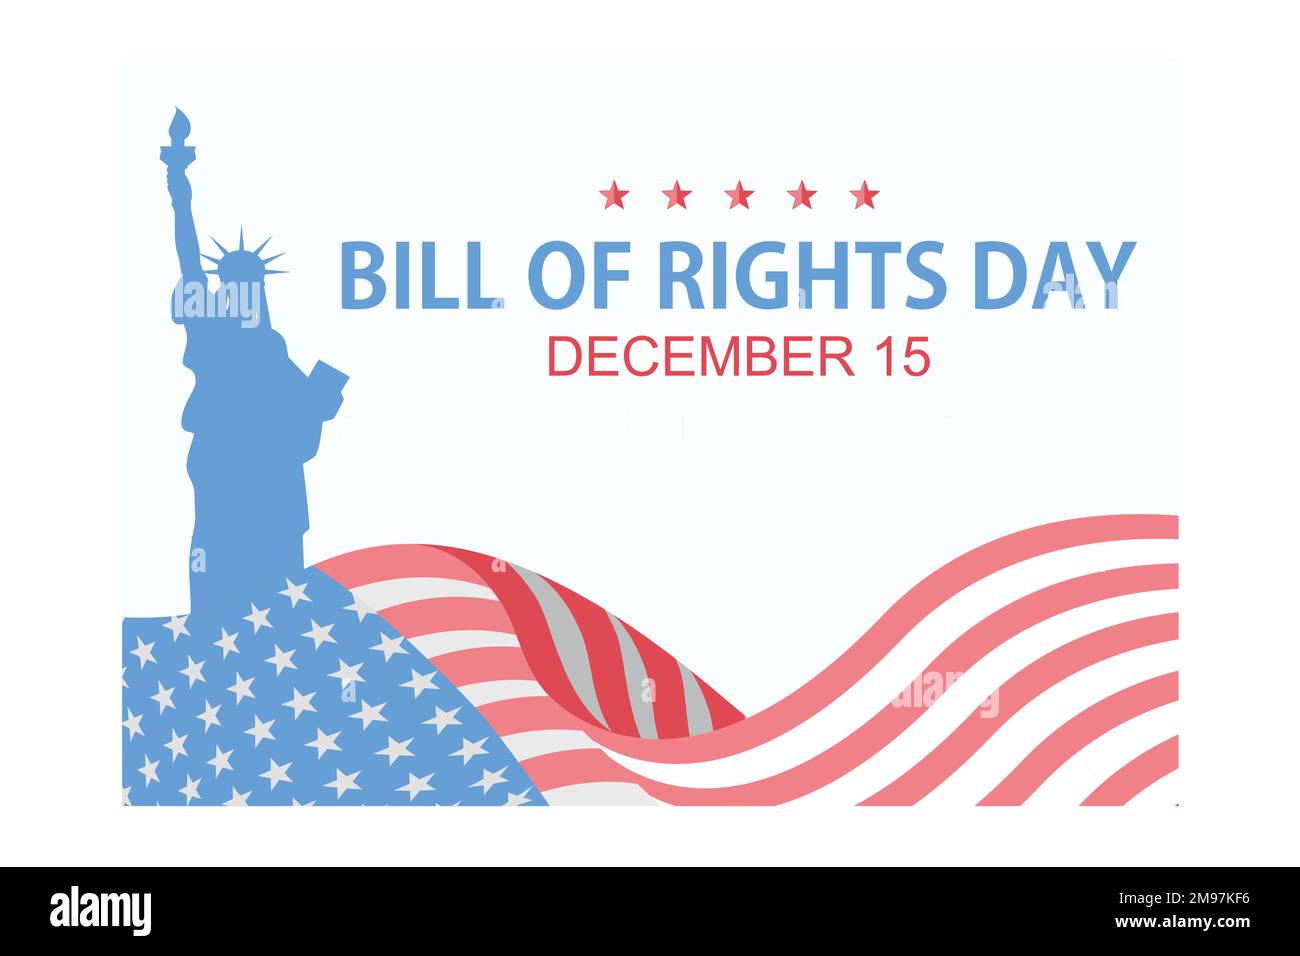 Bill of Rights Day in the United States, a commemoration of the ratification of the first 10 amendments to the US Constitution. December 15, flat vect Stock Vector